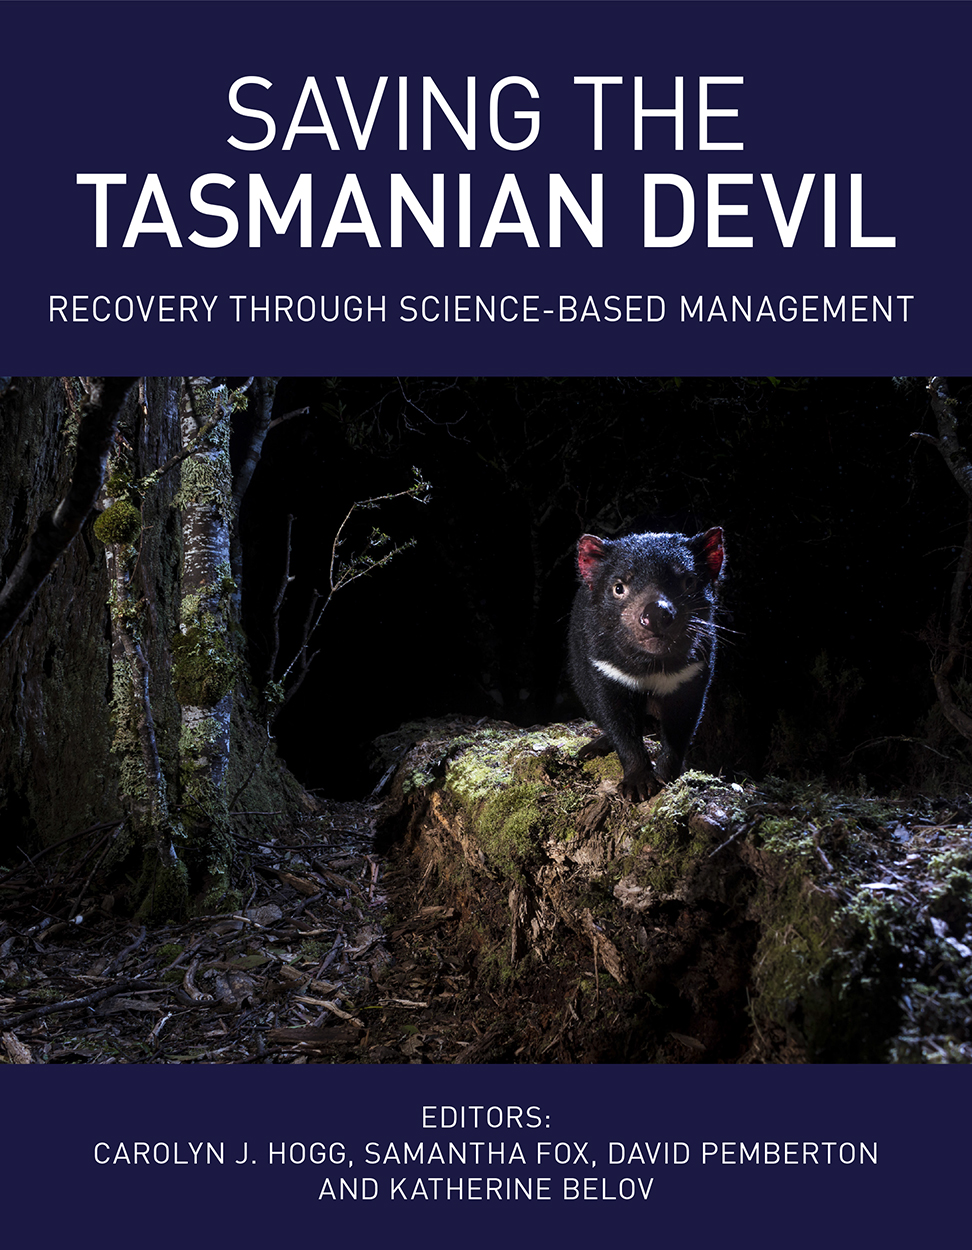 Cover of Saving the Tasmanian Devil featuring a photo of a Tasmanian devil standing on a tree stump at night.